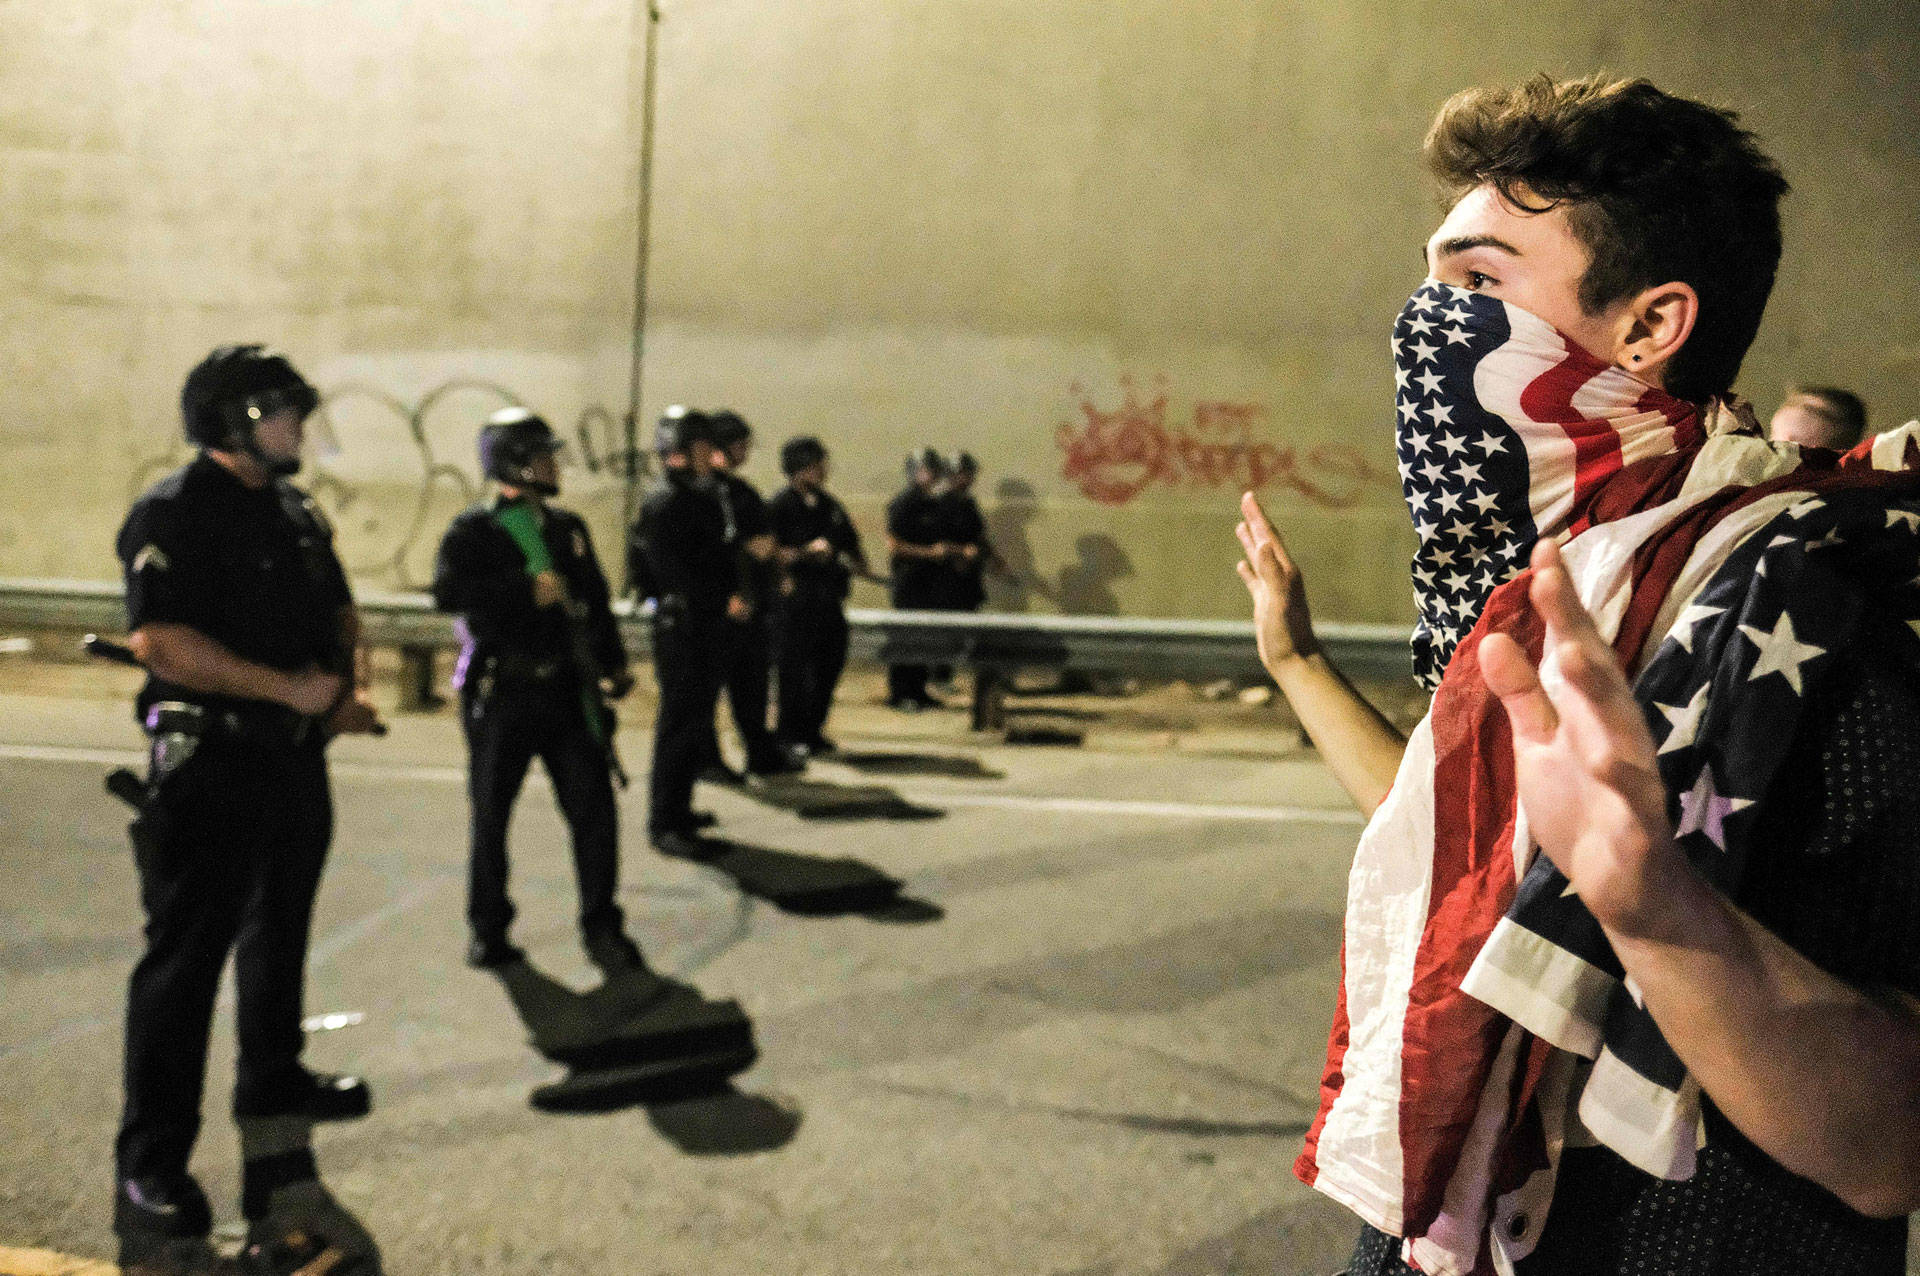 A protester (R) confronts police as protesters shut down the 101 Freeway following a rally one day after Donald Trump's presidential election victory in Los Angeles, late on November 9, 2016.  RINGO CHIU/AFP/Getty Images